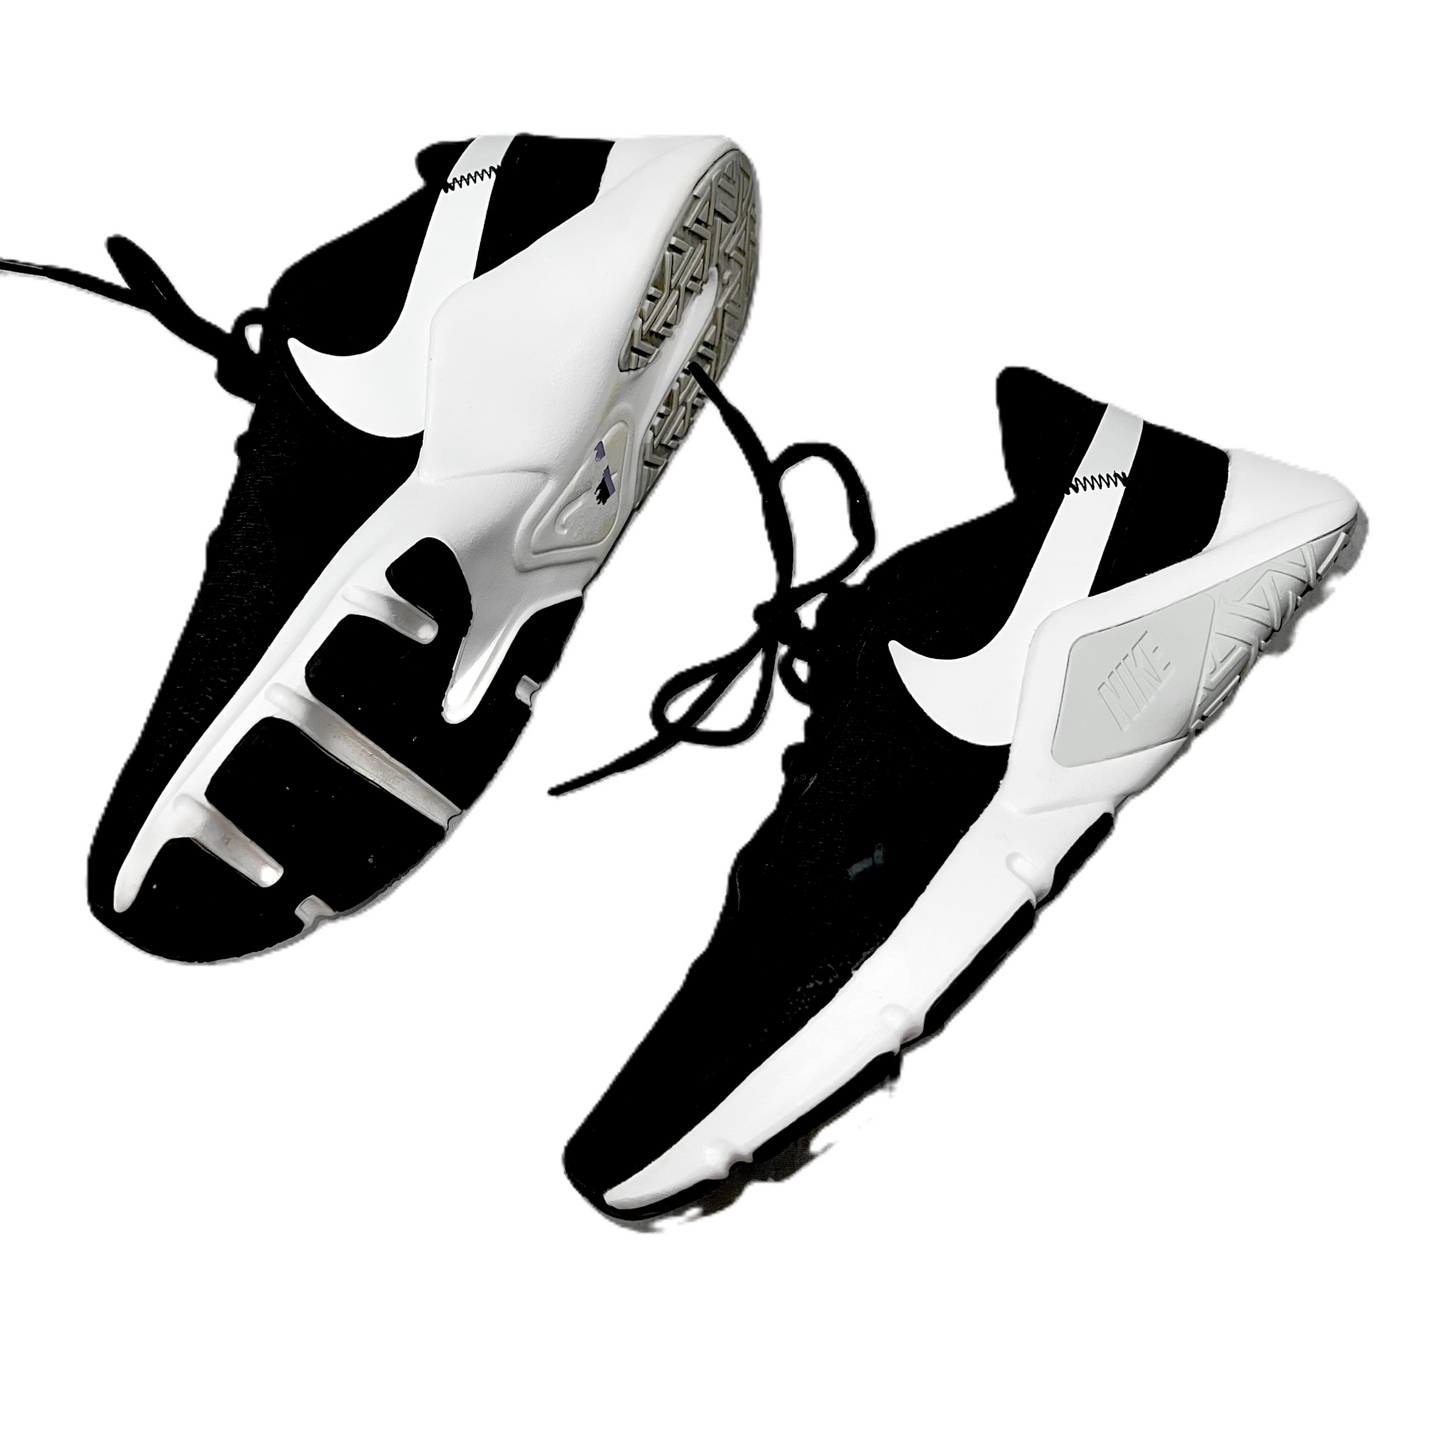 Black & White Shoes Athletic By Nike, Size: 8